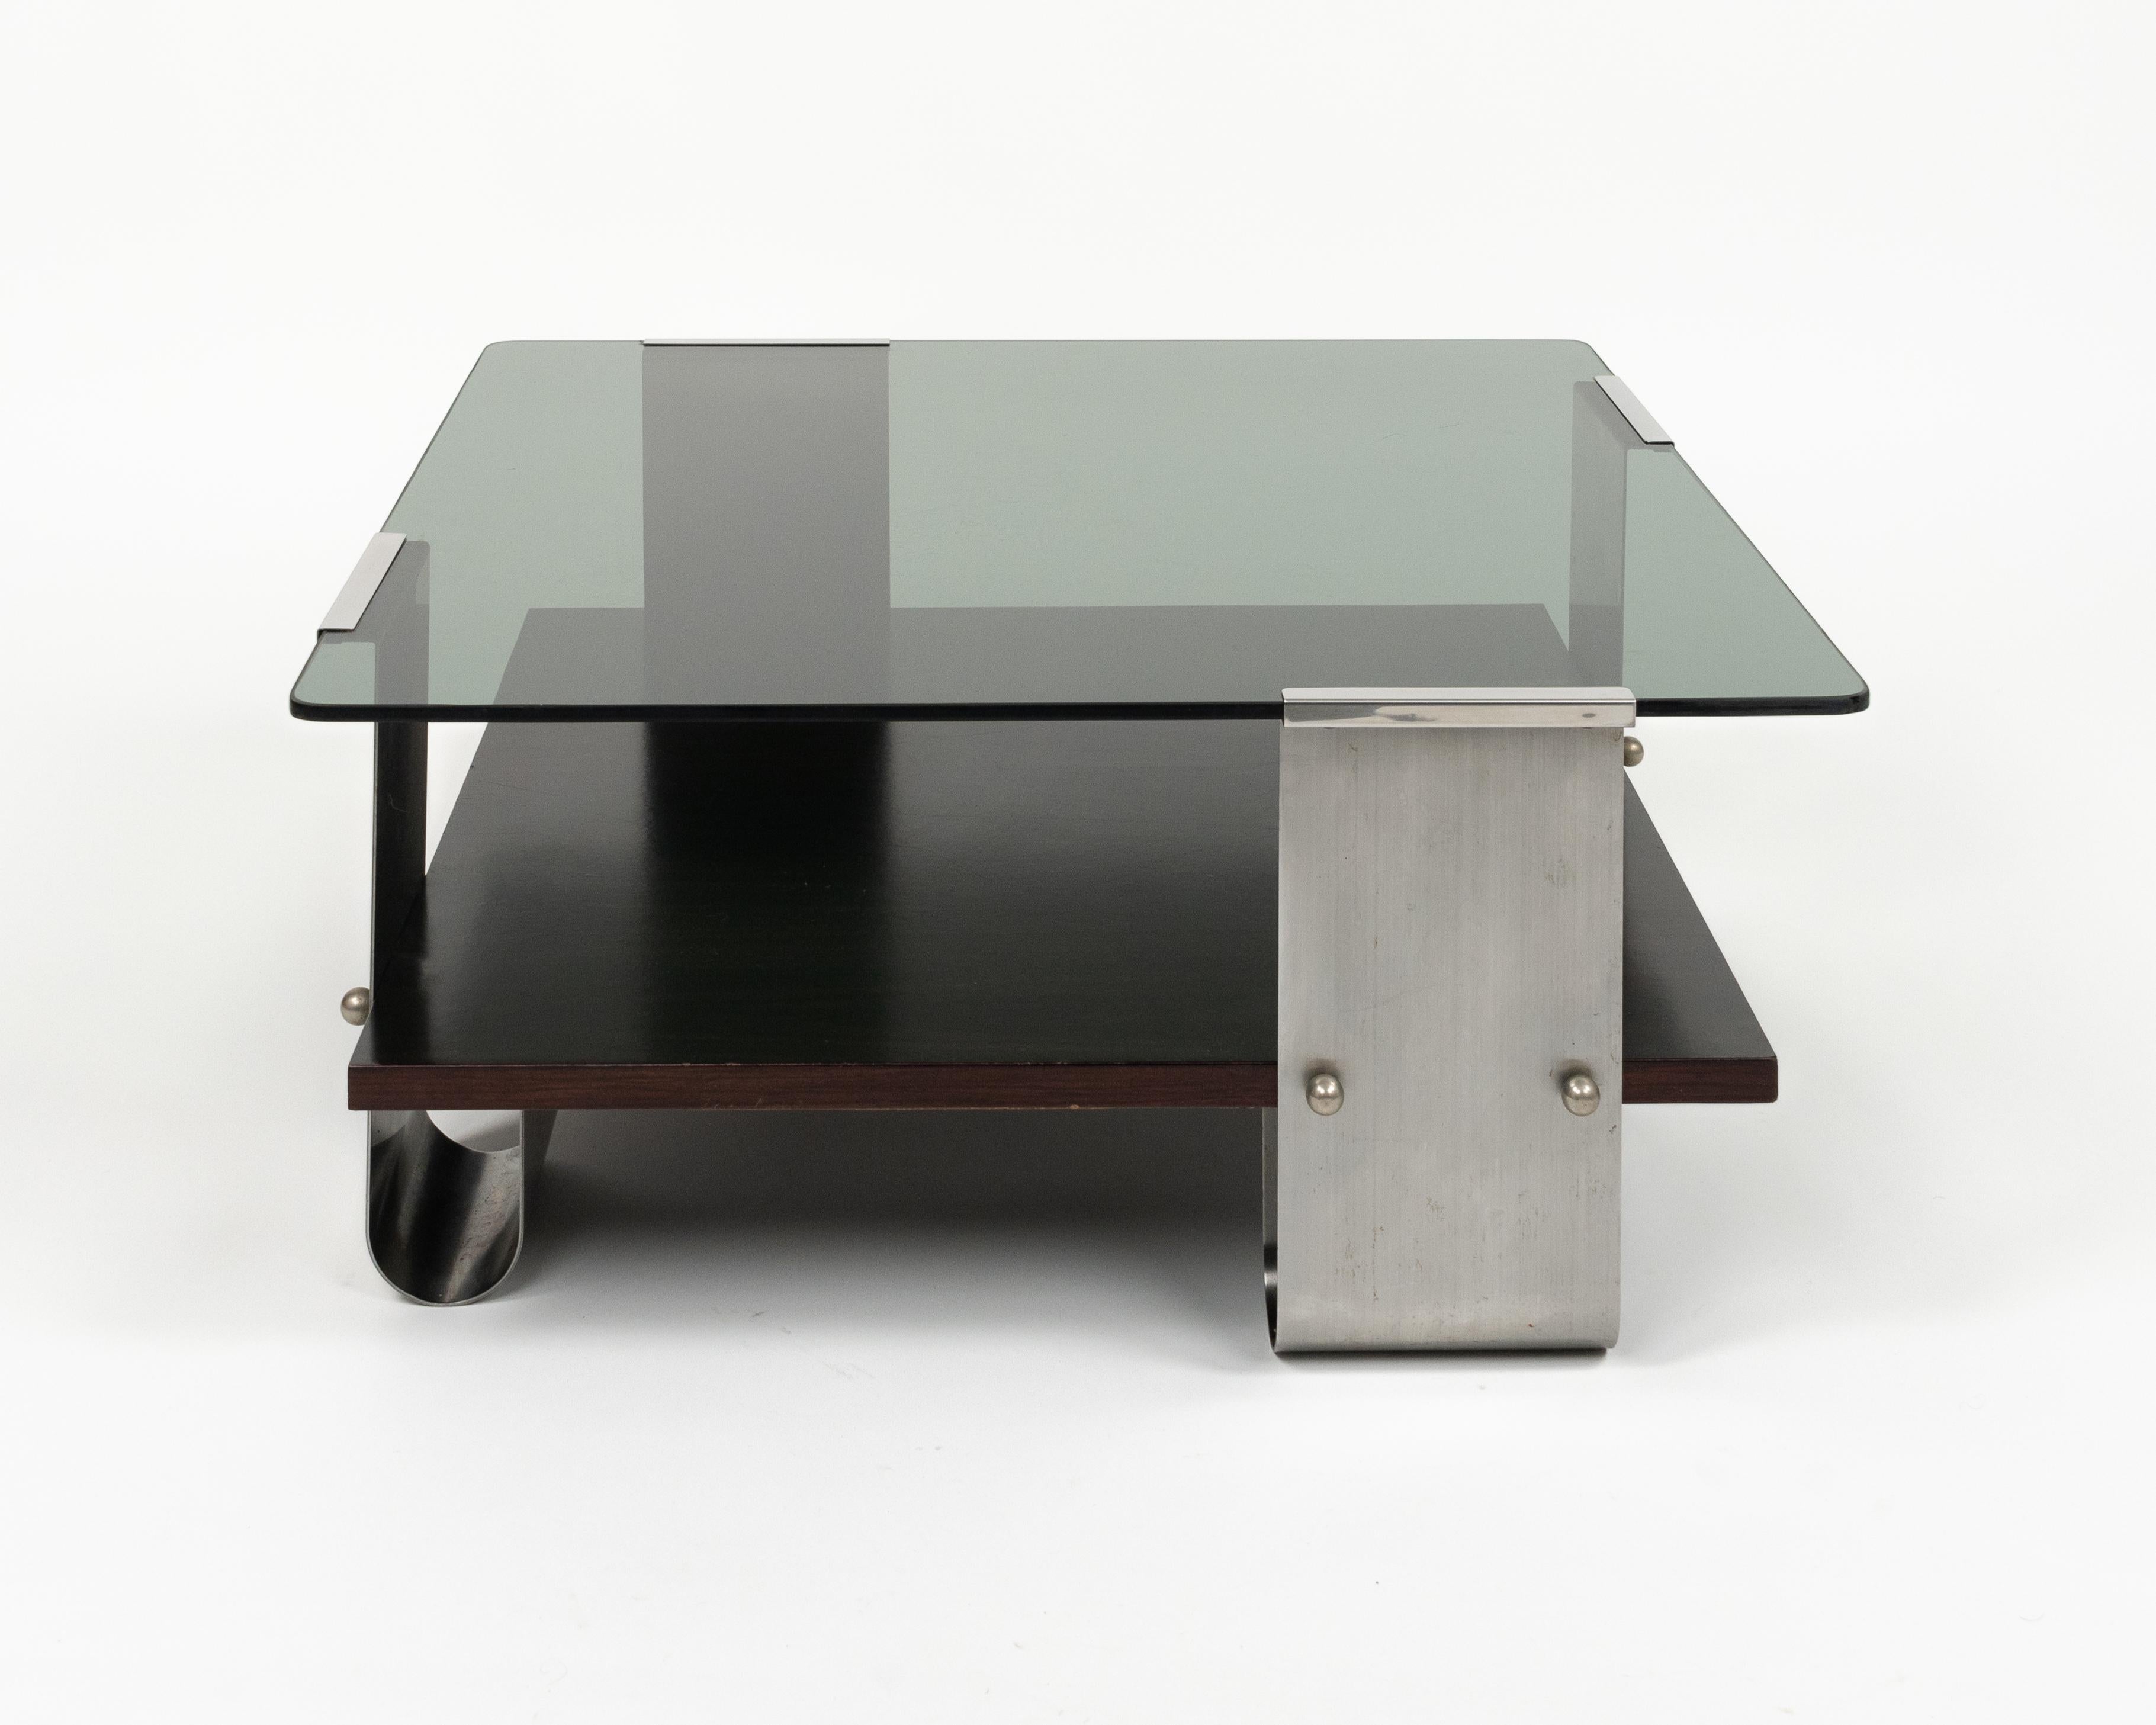 Late 20th Century Midcentury Coffee Table in Steel, Wood & Glass by Francois Monnet, France, 1970s For Sale